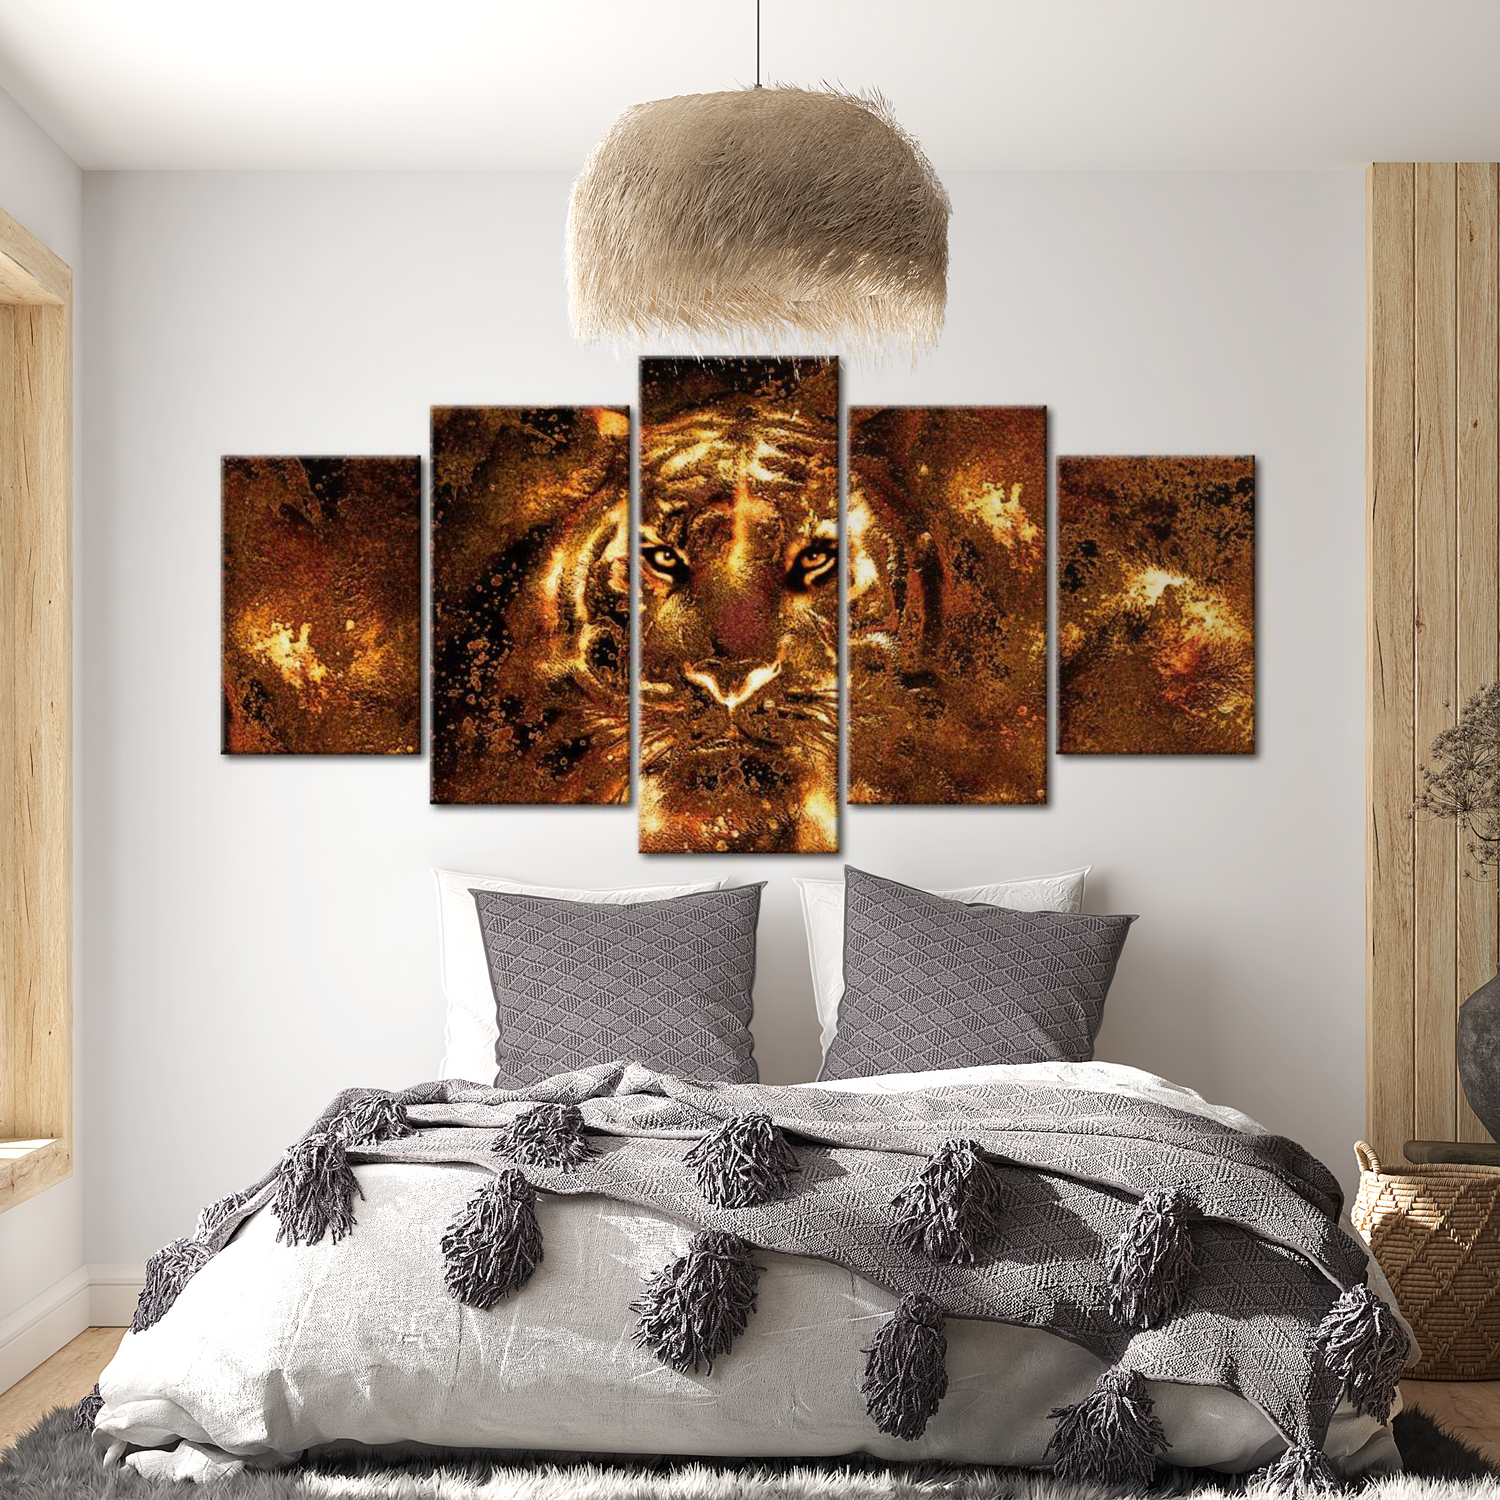 Stretched Canvas Animal Art - Golden Tiger 40"Wx20"H